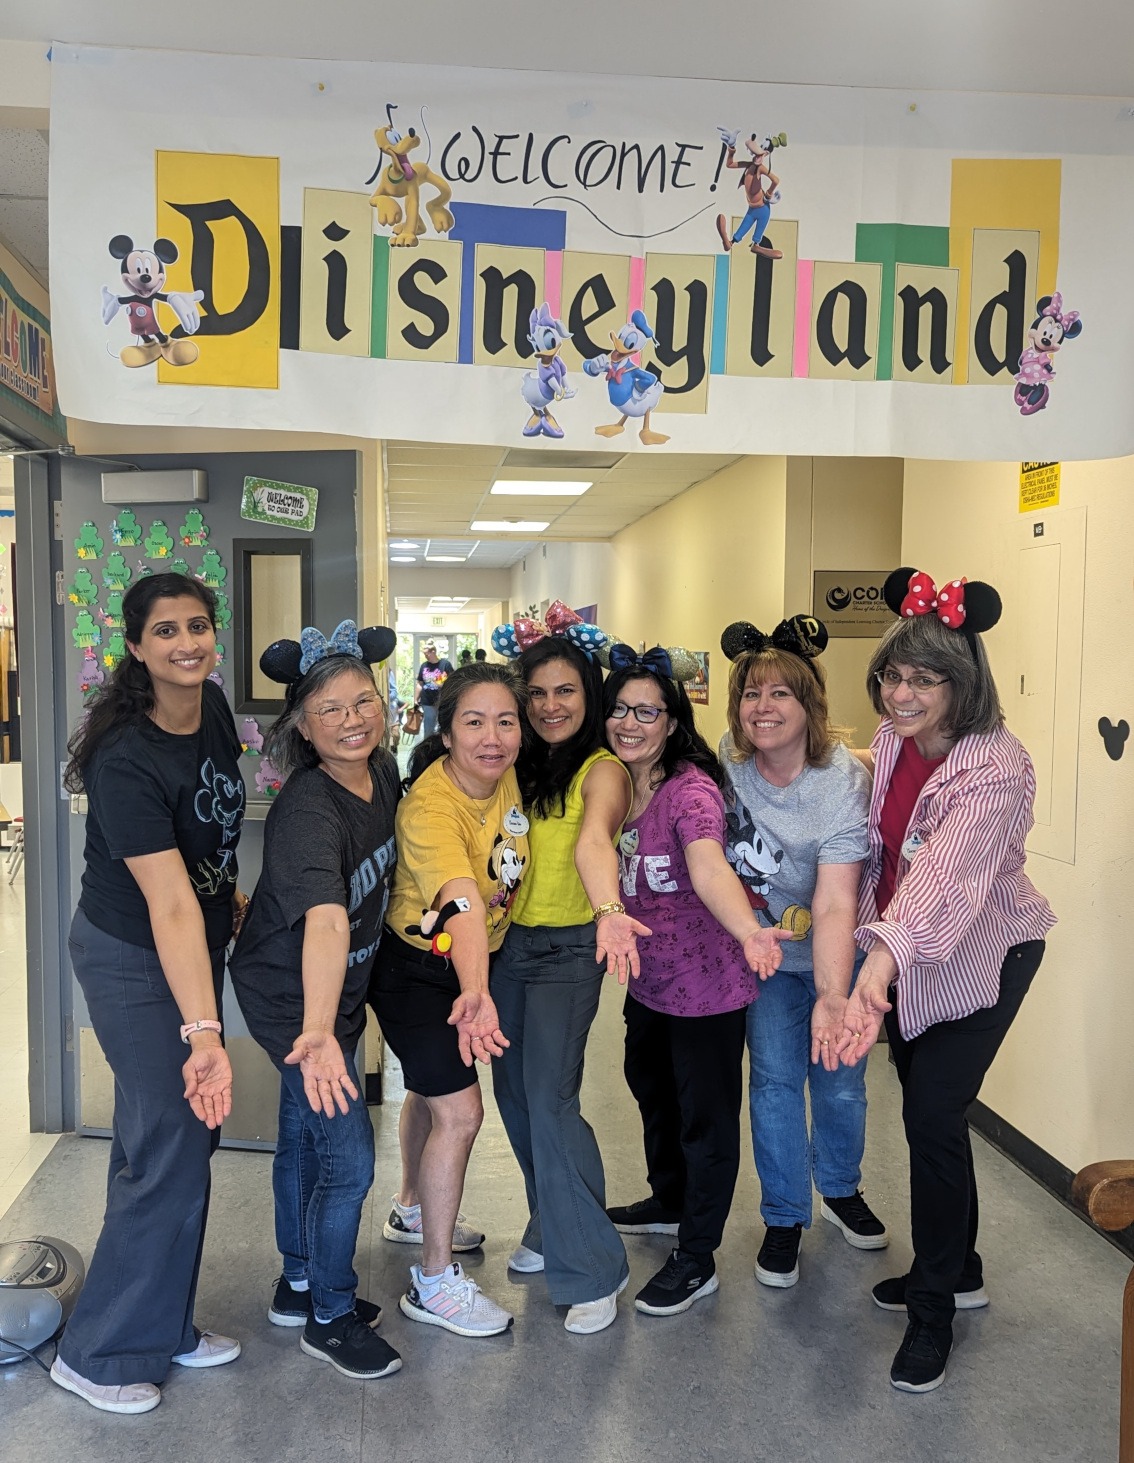 Parent Education staff members standing in front of a sign which reads, "Welcome! Disneyland"